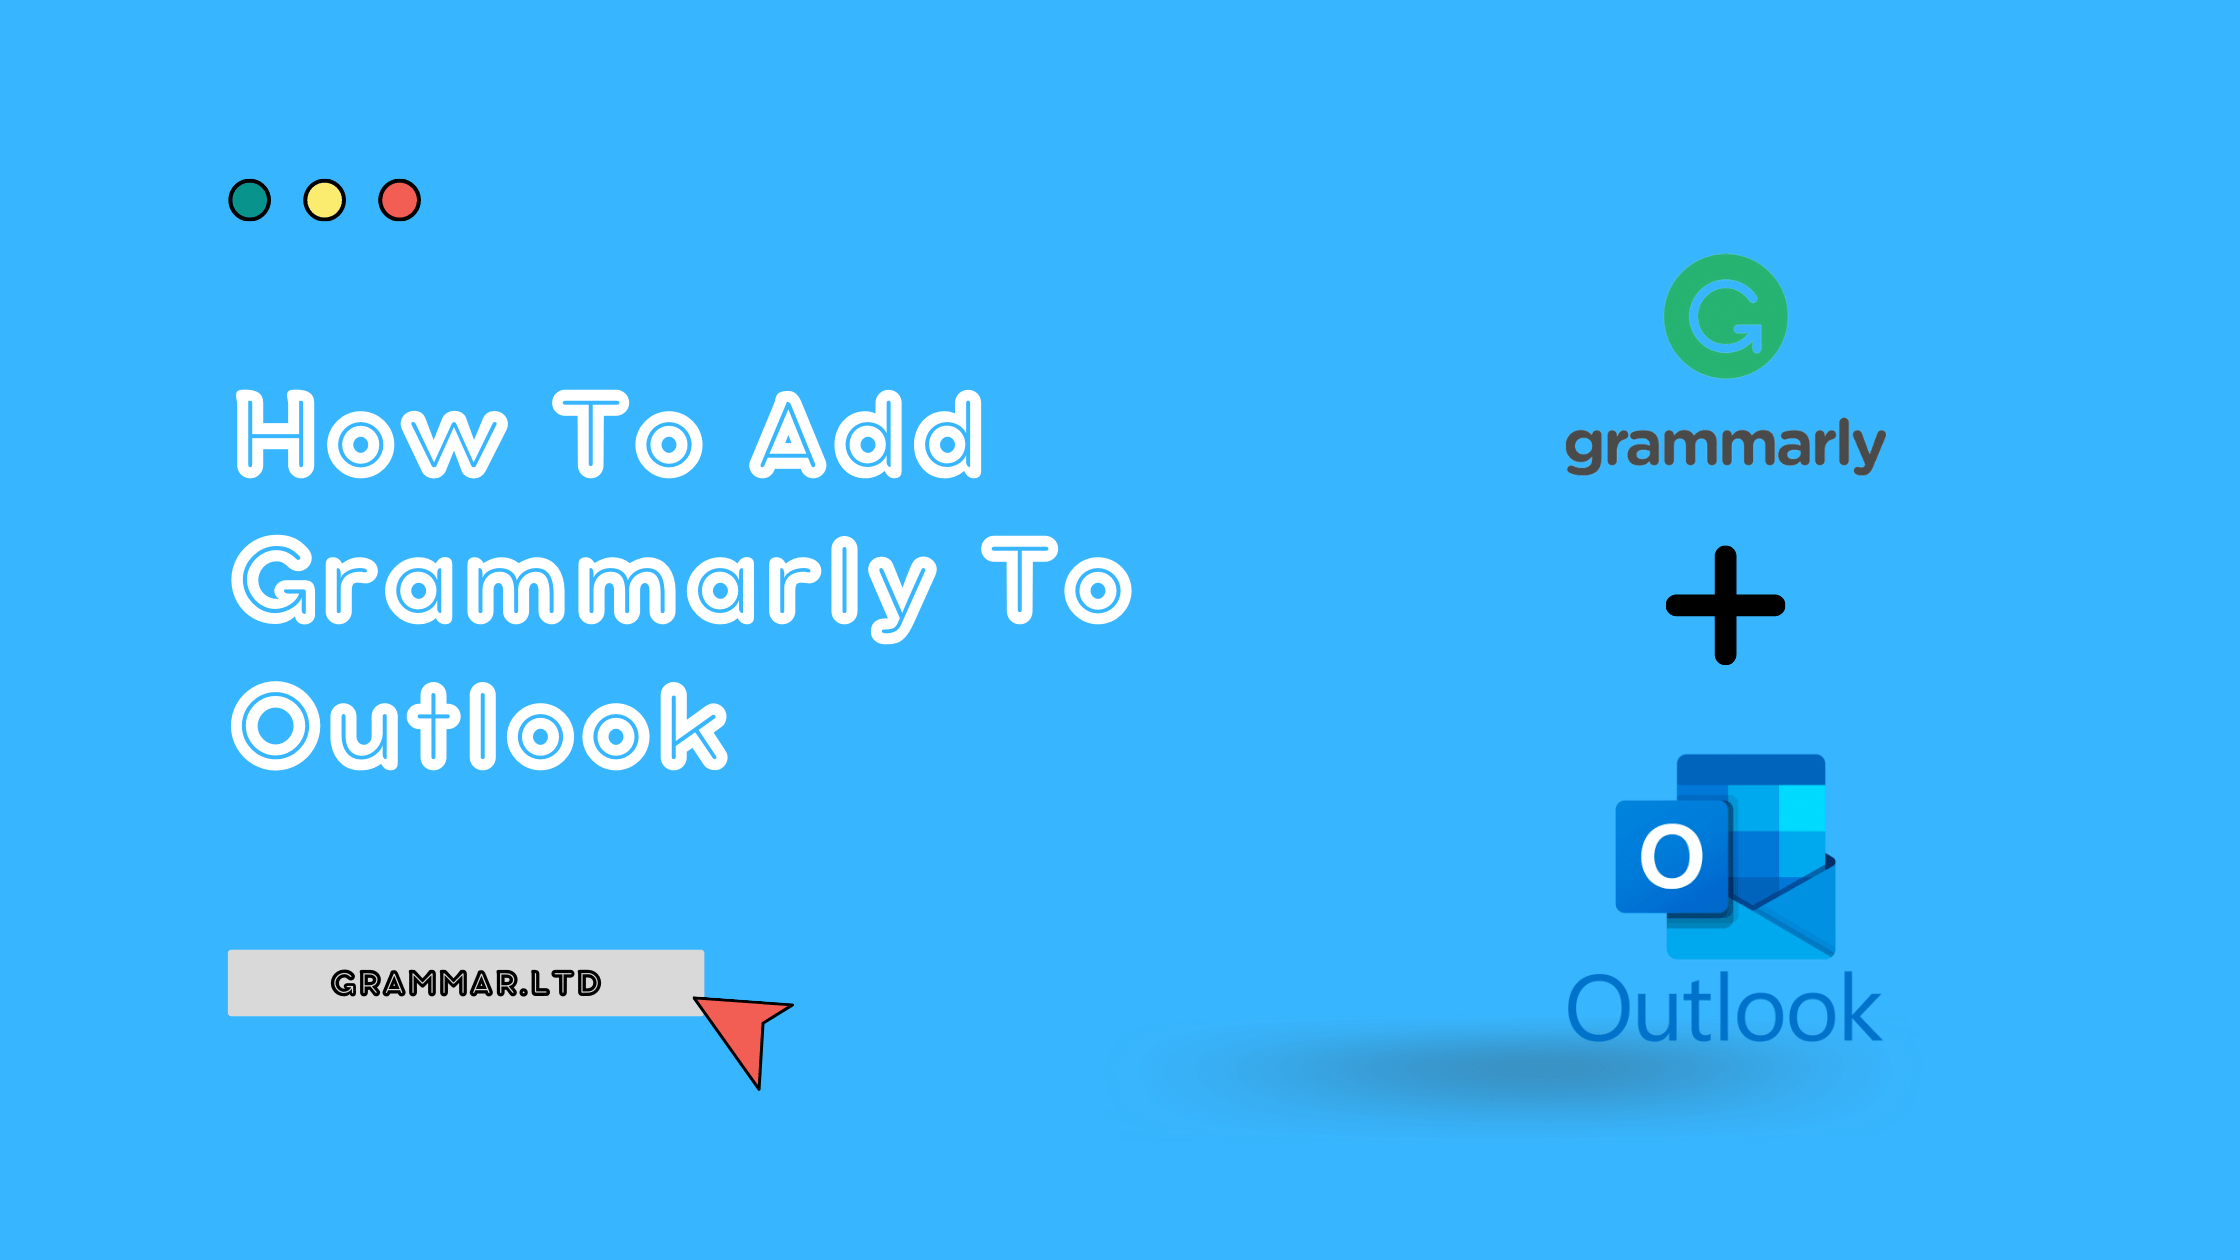 grammarly free download outlook